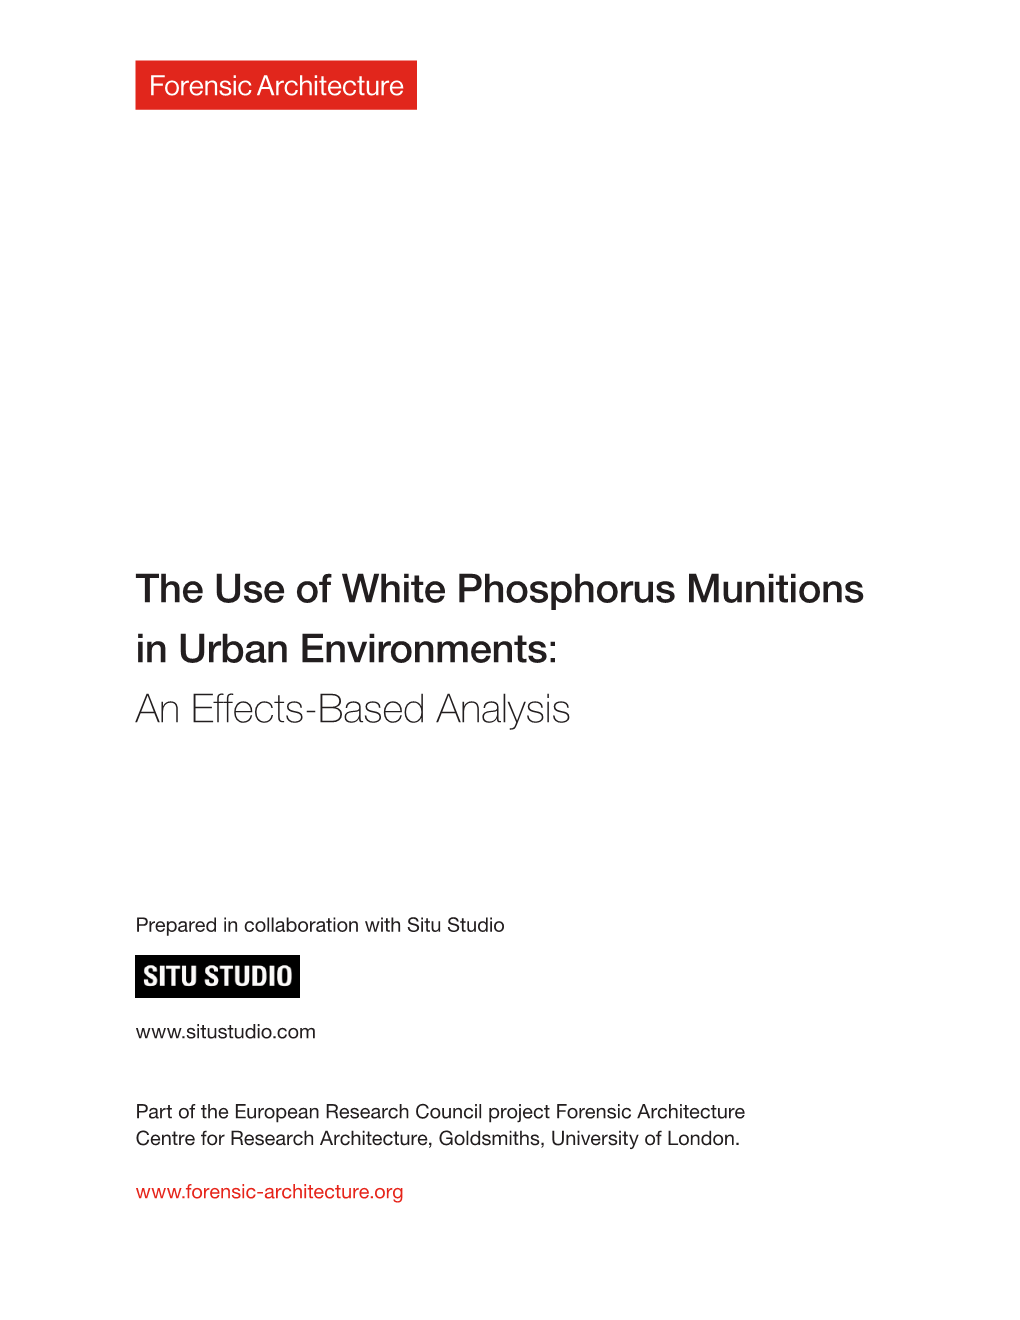 The Use of White Phosphorus Munitions in Urban Environments: an Effects-Based Analysis